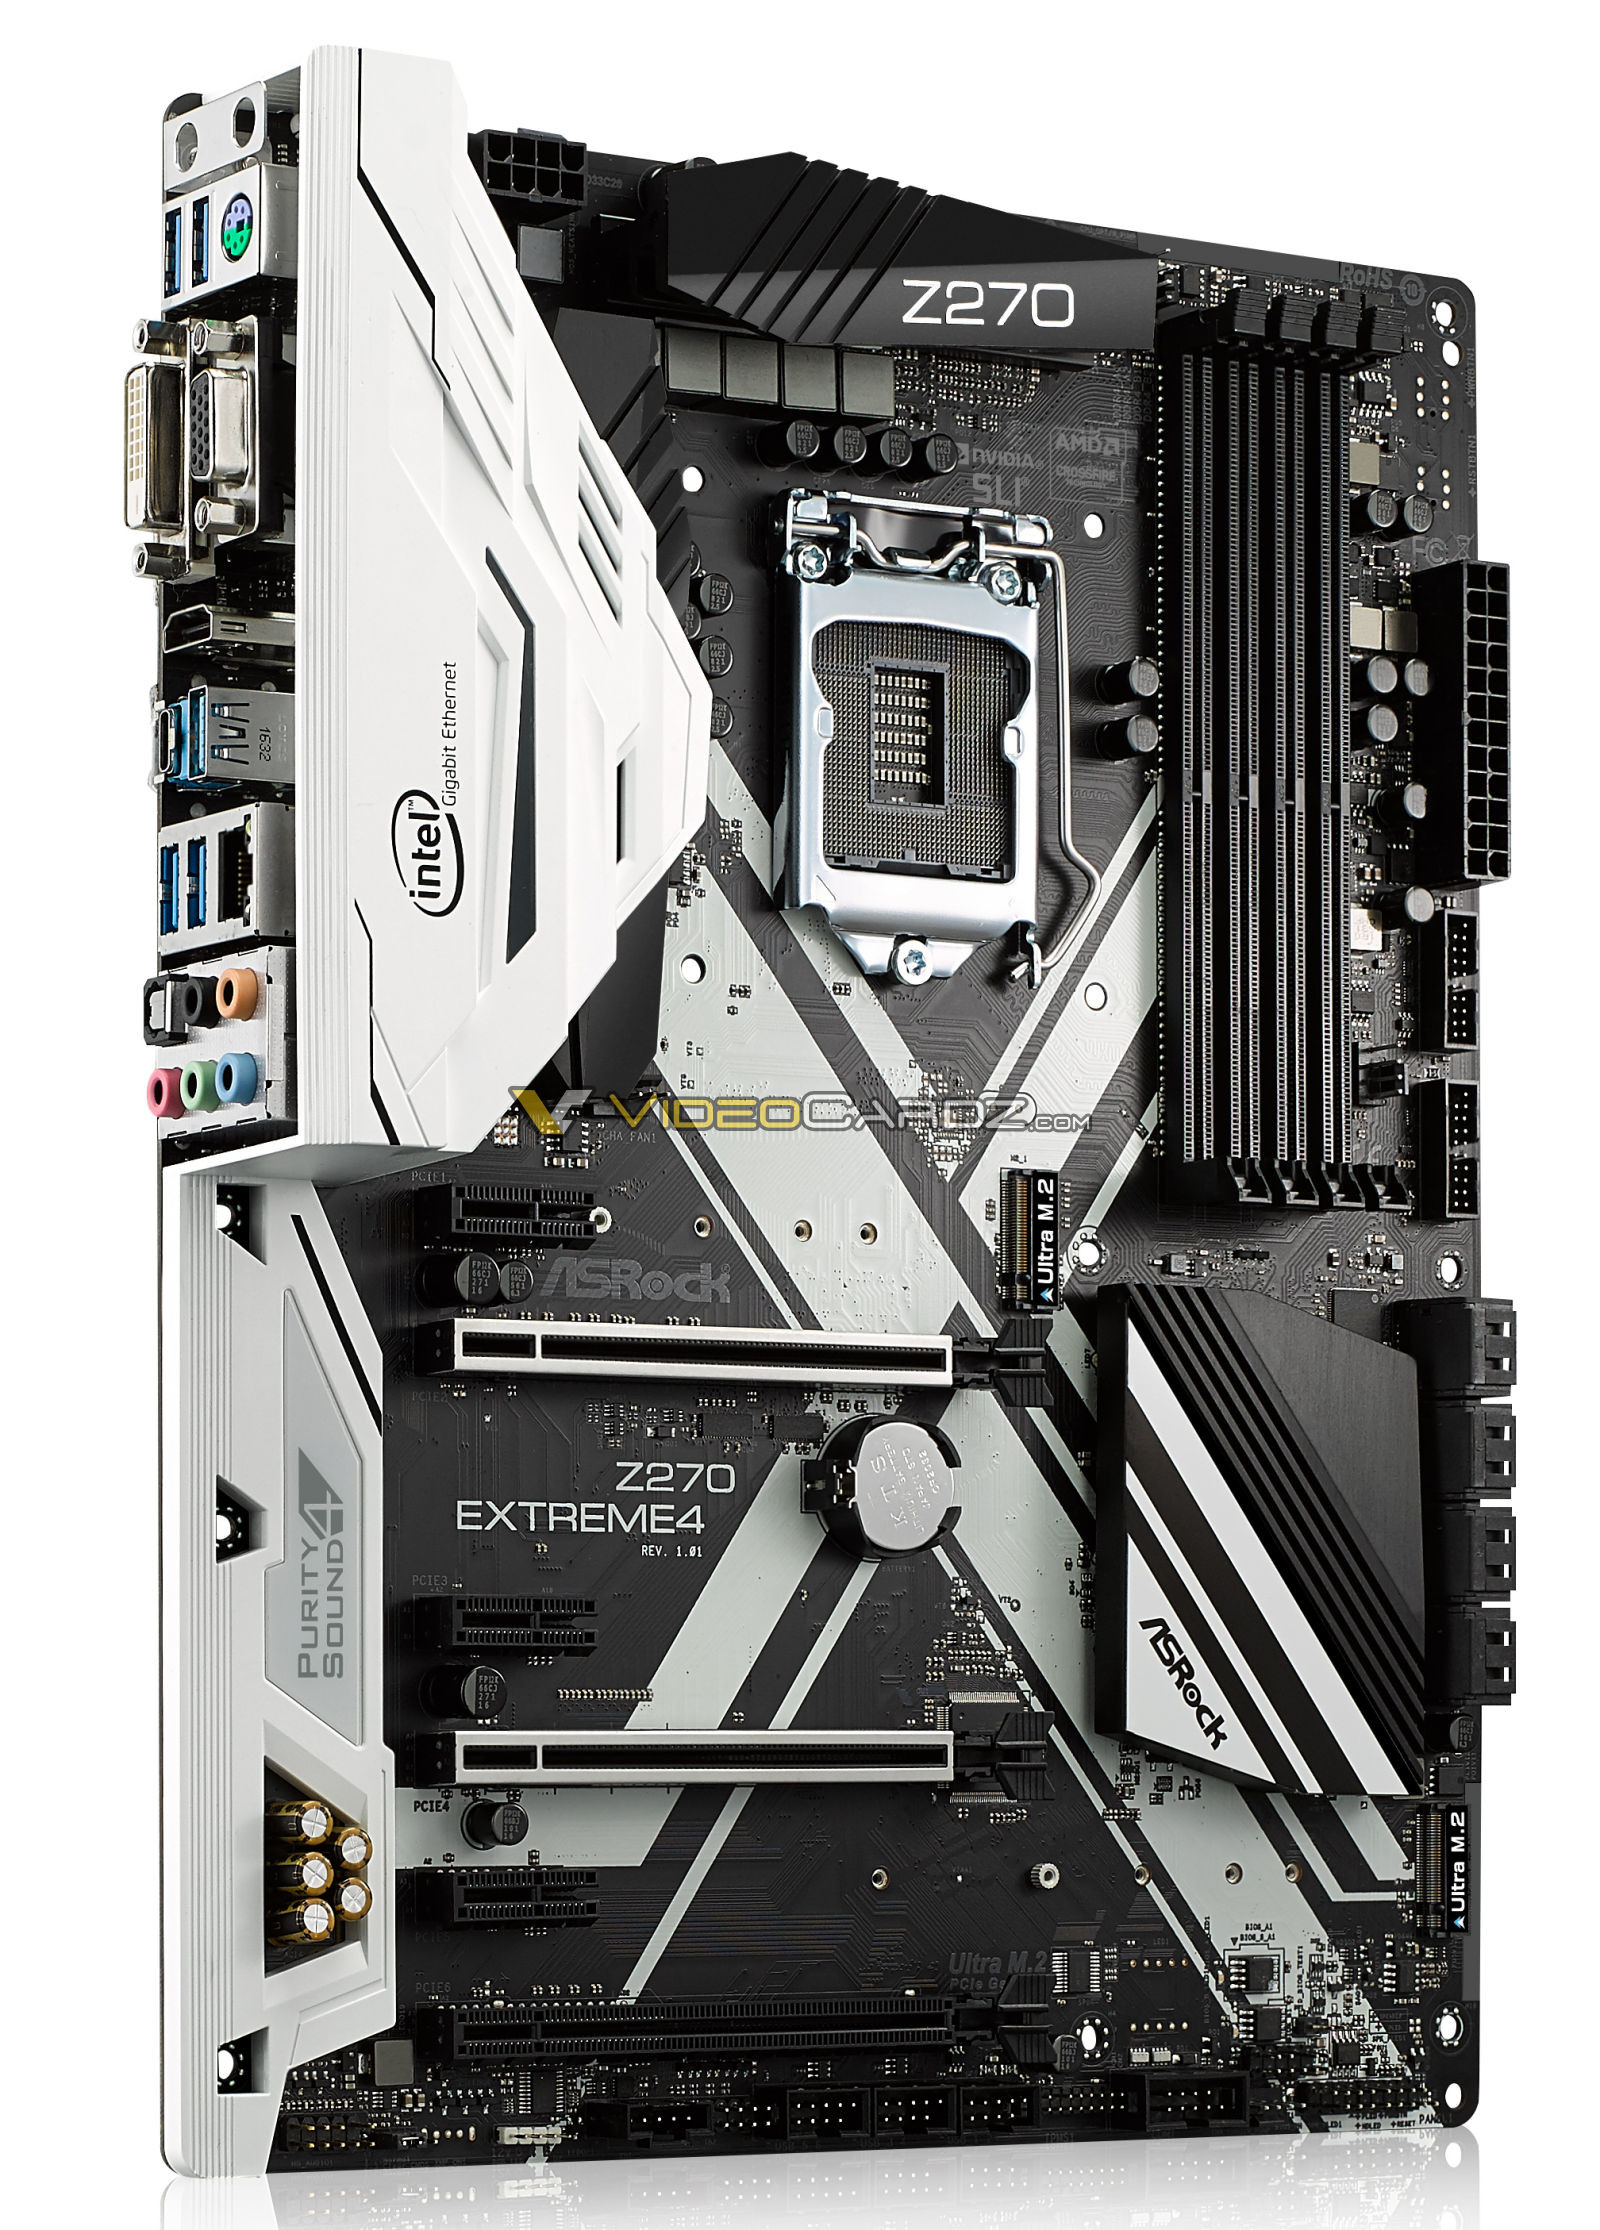 ASRock Z270 Extreme4 Motherboard Pictured | techPowerUp